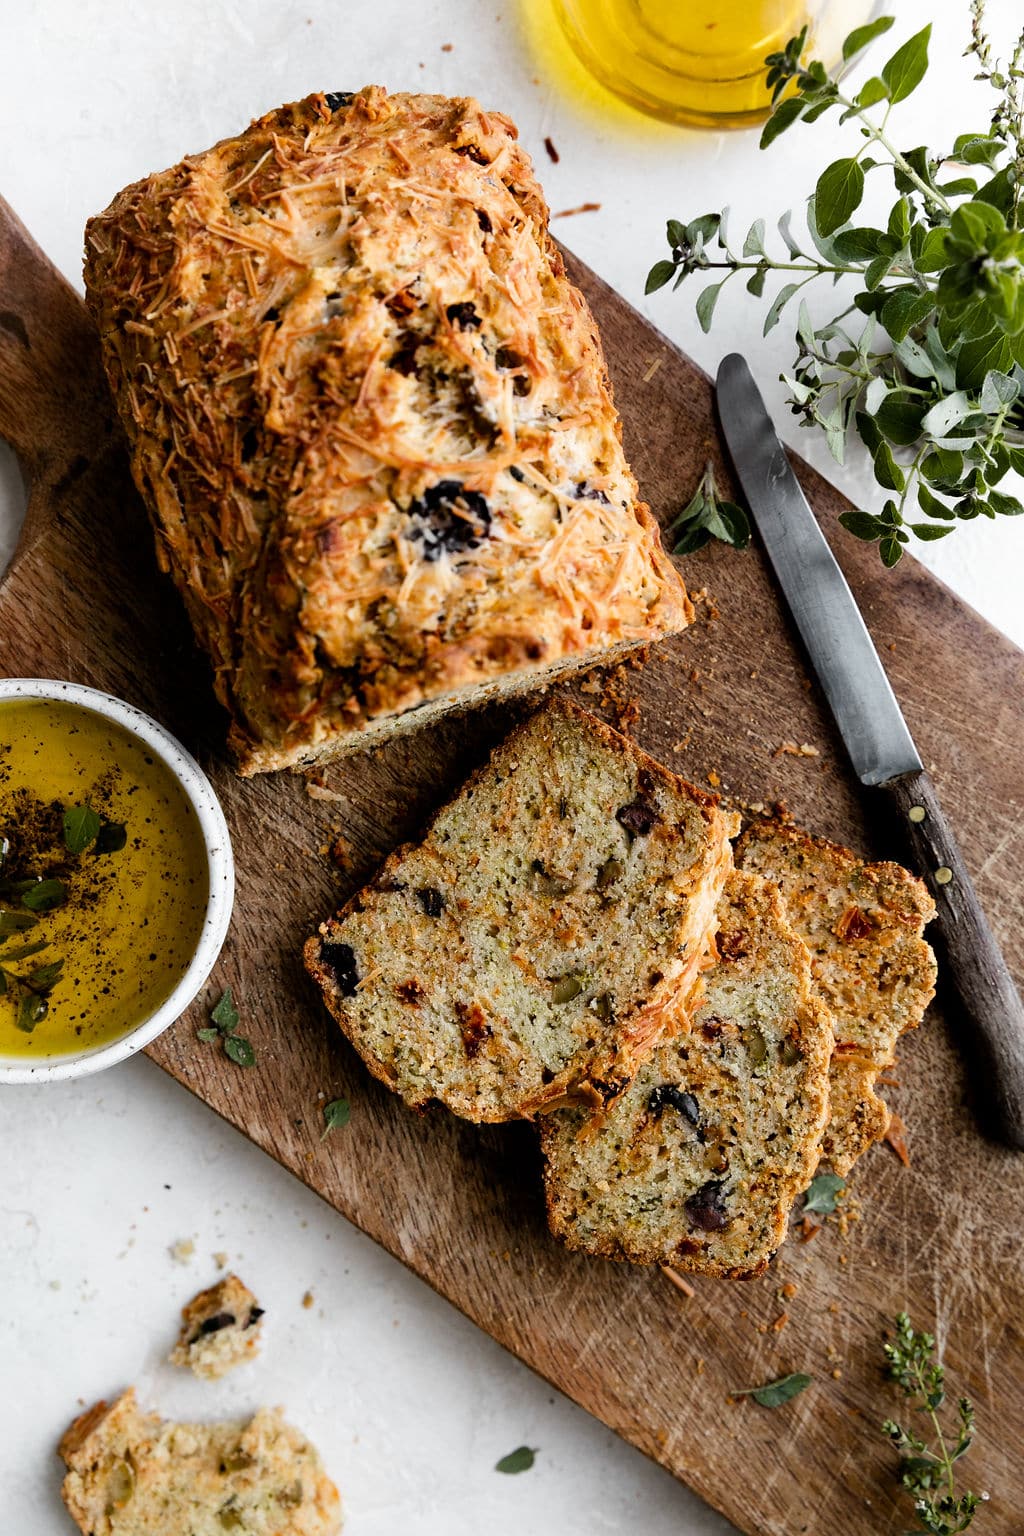 https://therealfooddietitians.com/wp-content/uploads/2021/10/Parmesan-Olive-Bread-10.jpg